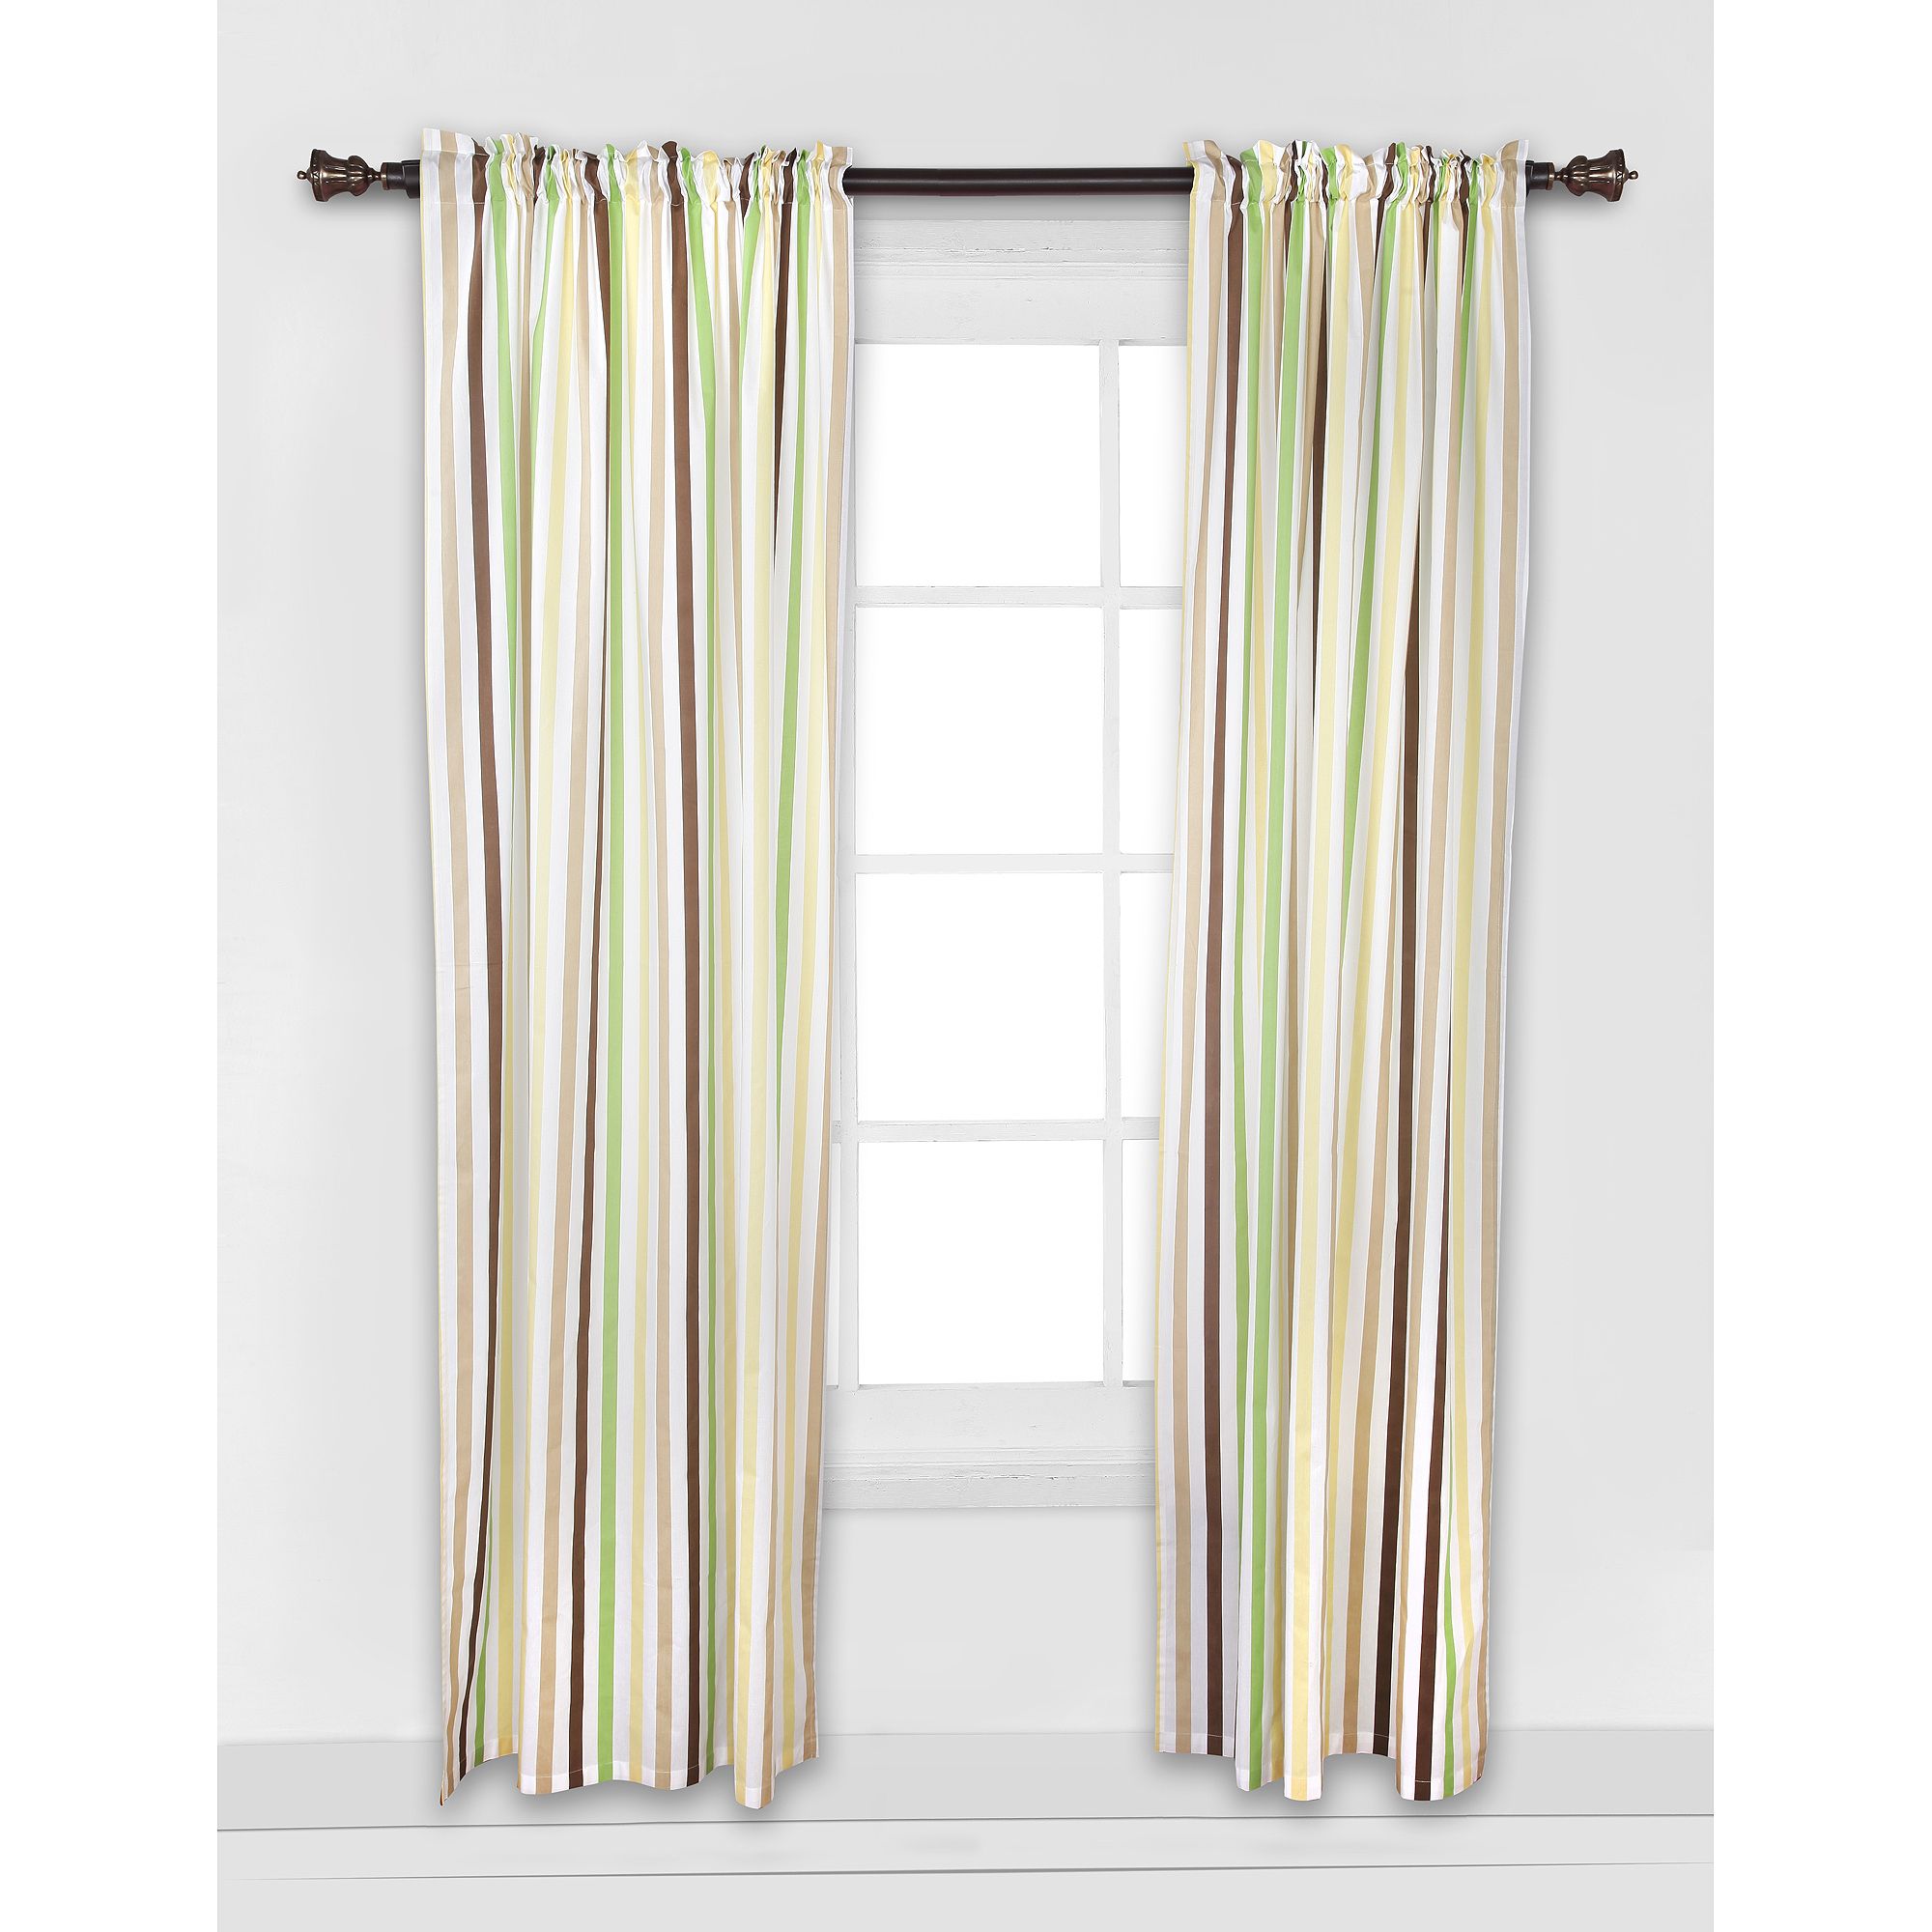 Bed Bath N More Ivory Micro Striped Semi Sheer Window Curtain Pieces –  Tiers, Valance And Swag Options Throughout White Micro Striped Semi Sheer Window Curtain Pieces (View 9 of 20)